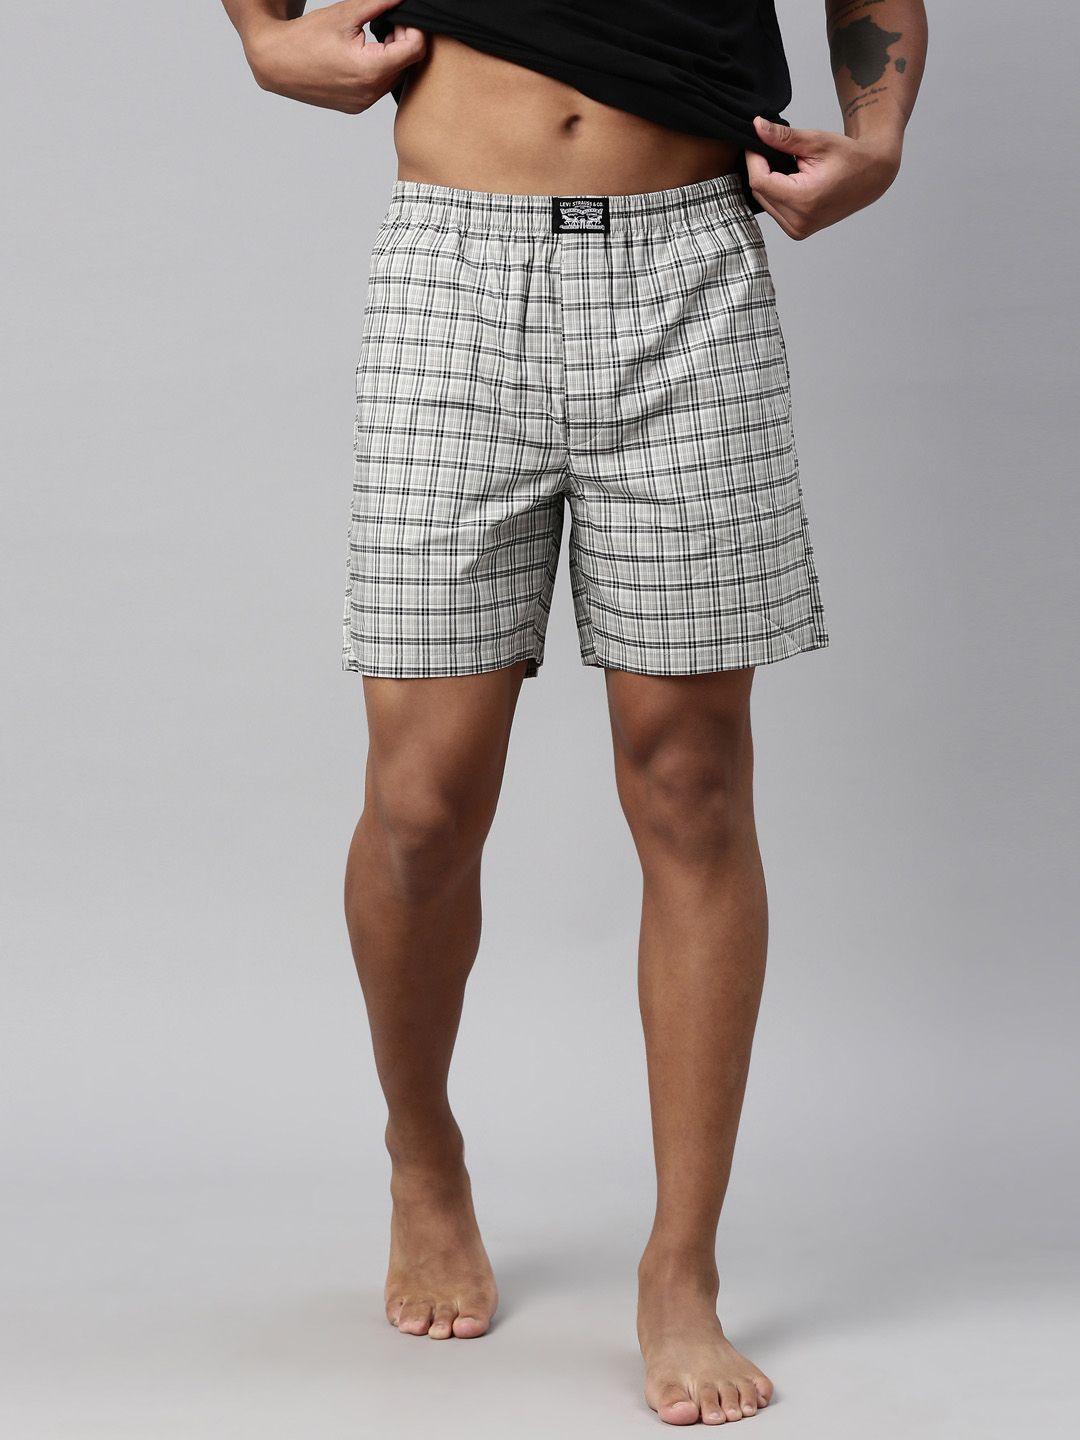 levis-men-smartskin-technology-woven-cotton-boxer-shorts-with-tag-free-comfort-#024